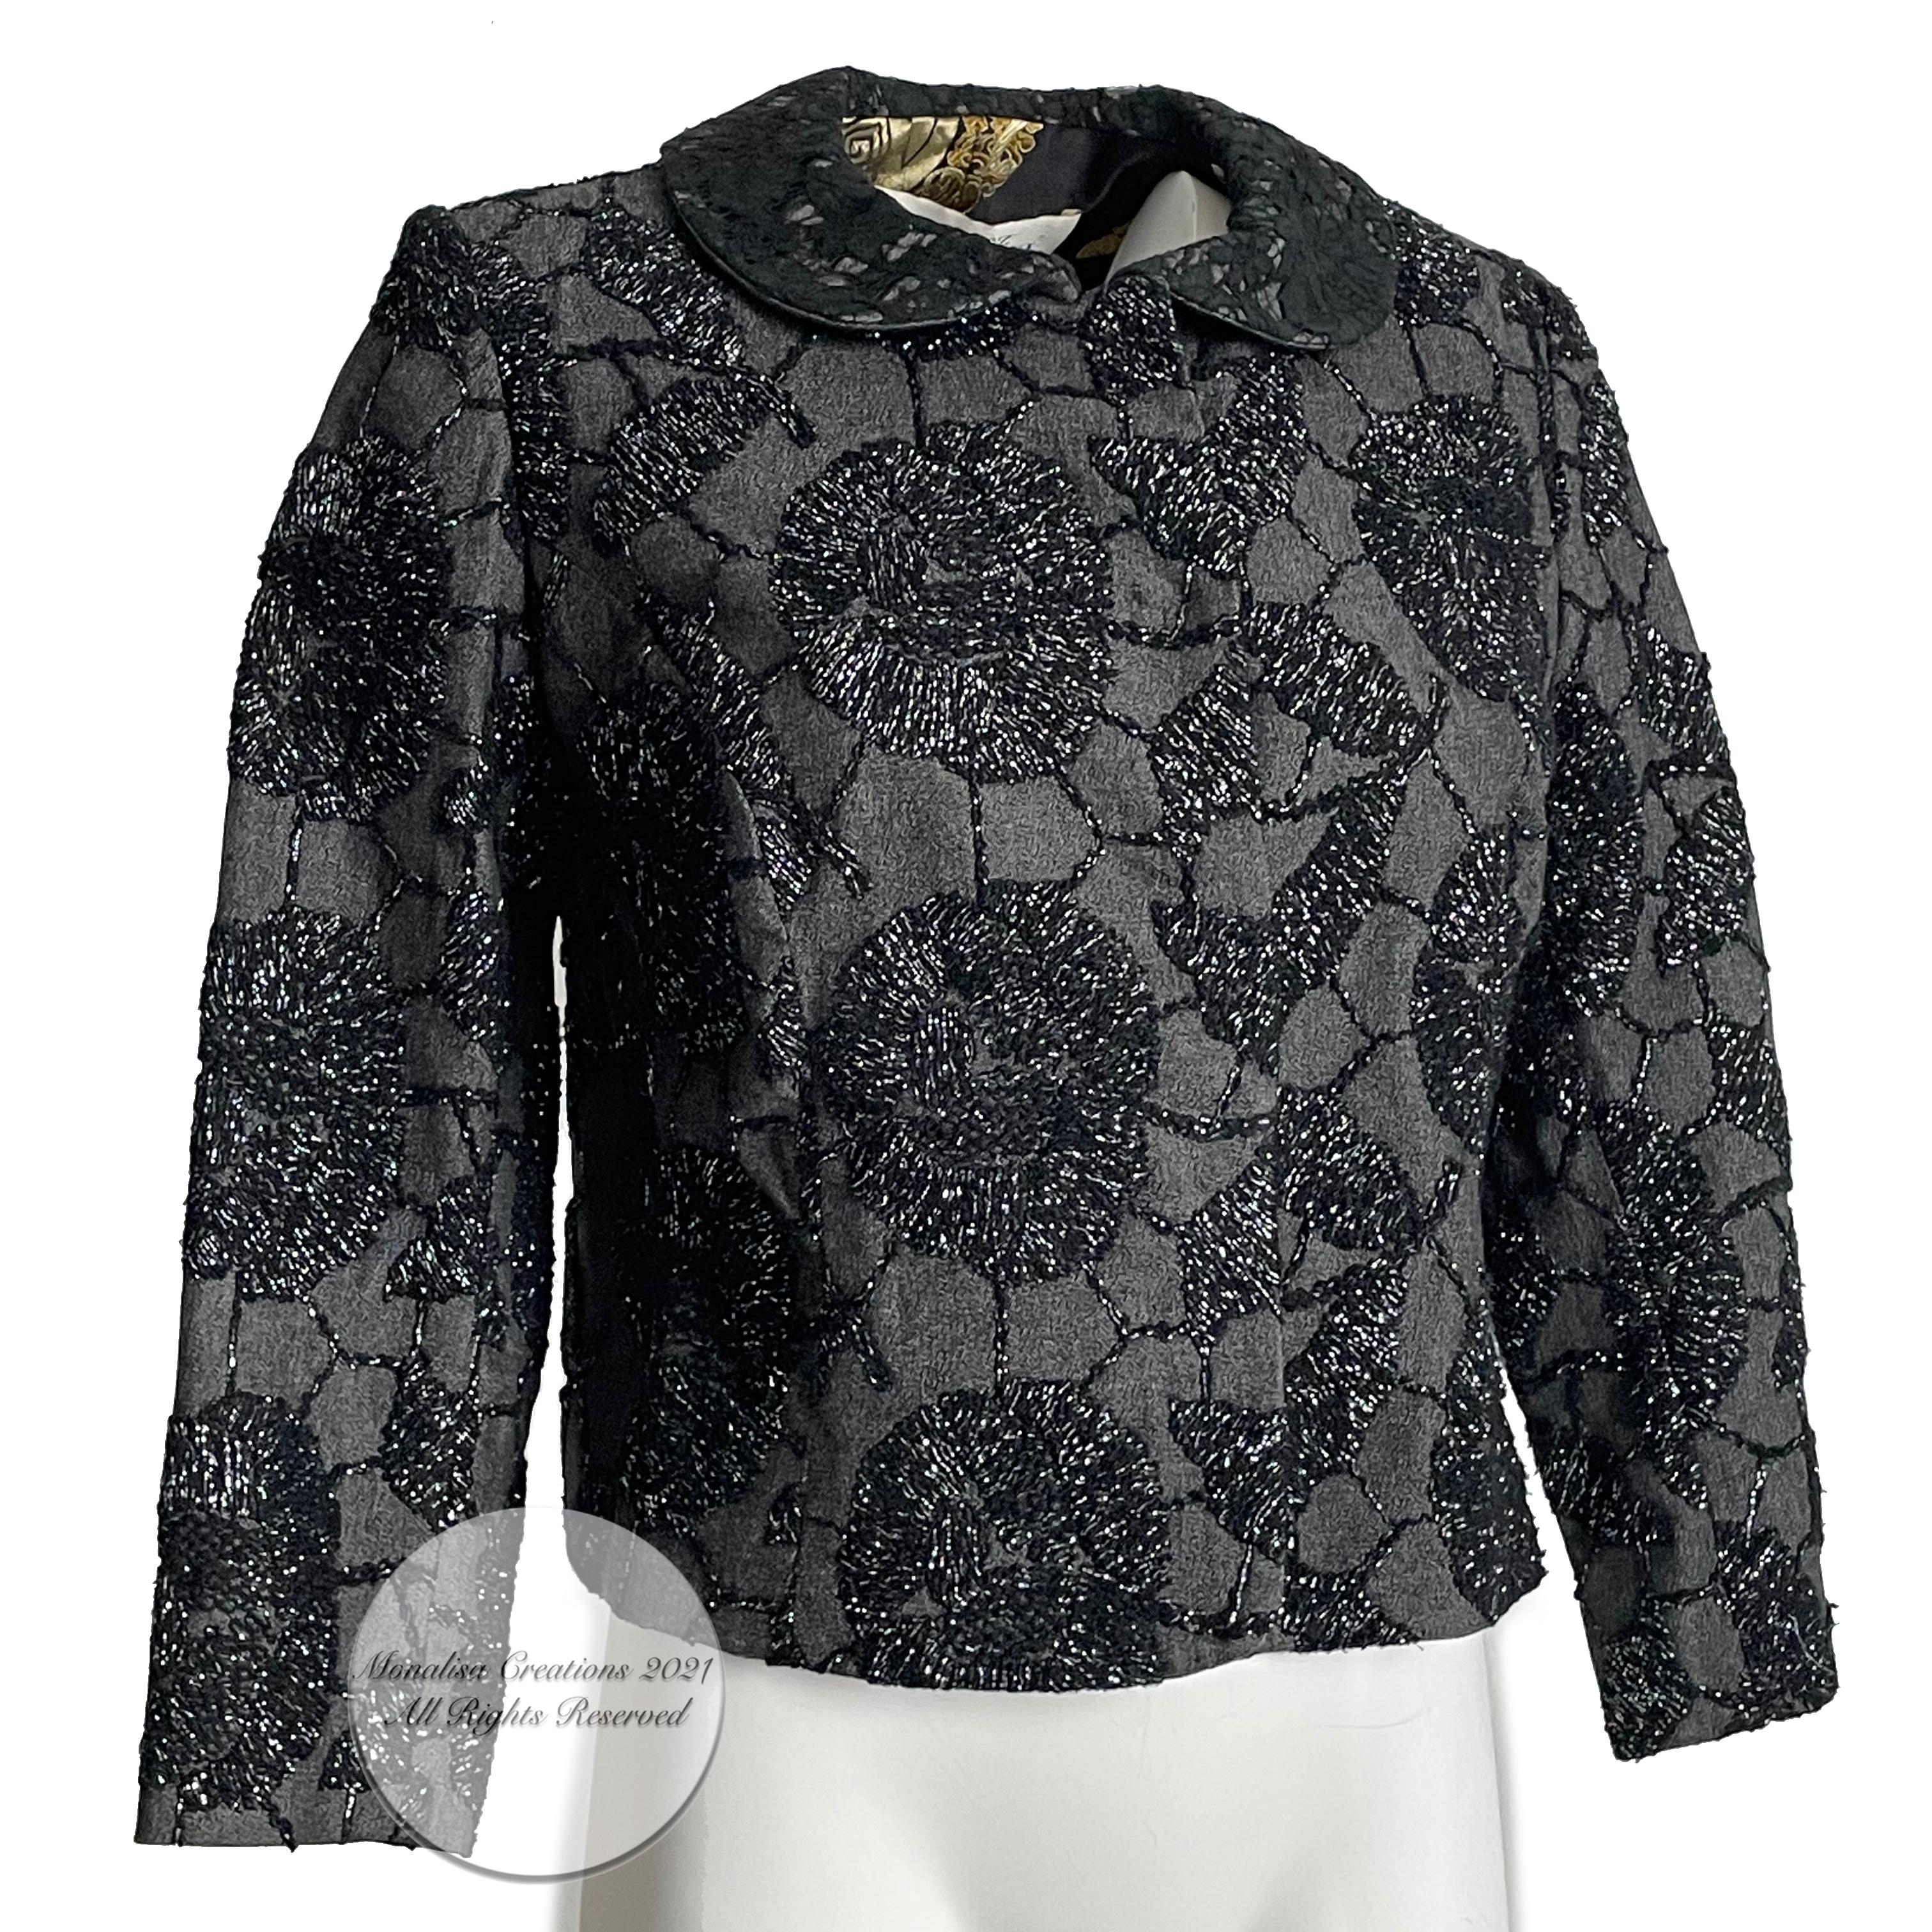 Fabulous and unique cropped jacket by UK designer Tomasz Starzewski, who designed for the late Princess of Wales amongst other members of the Royal Family. The exterior features intricate metallic-thread embroidered florals against a charcoal